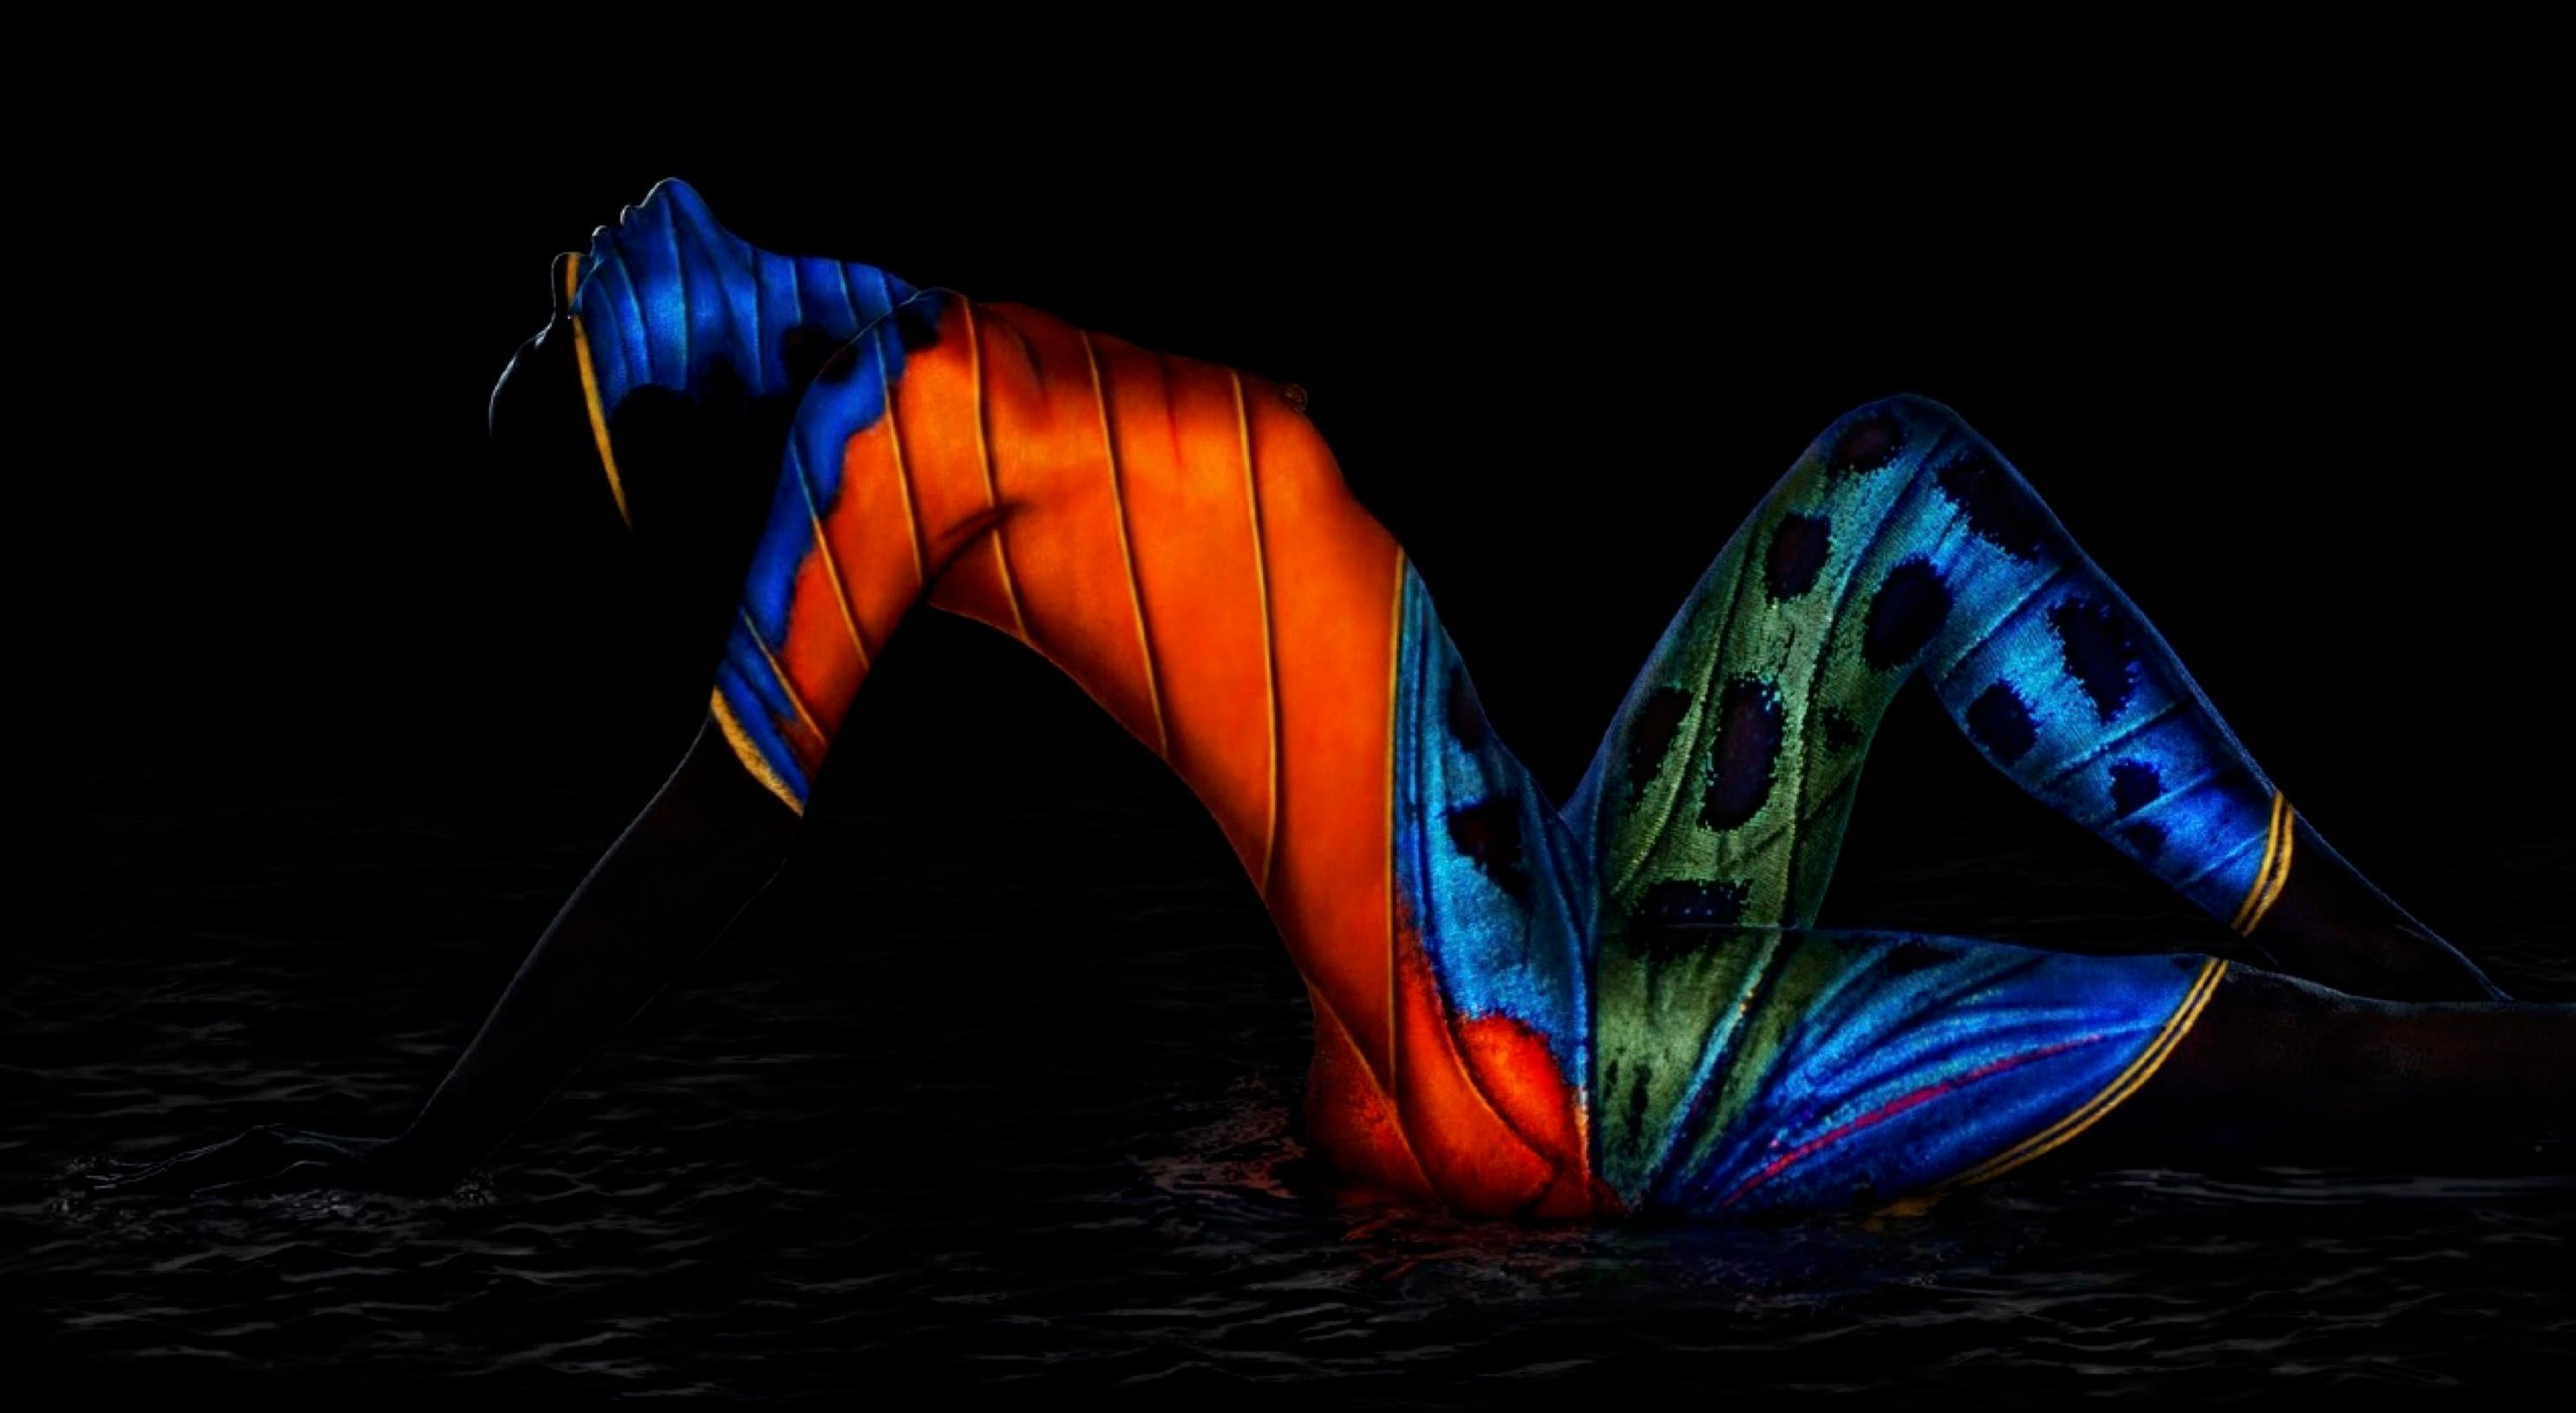 "Butterfly 20" Photography 48" x 86" inch Edition 2/10 by Giuliano Bekor